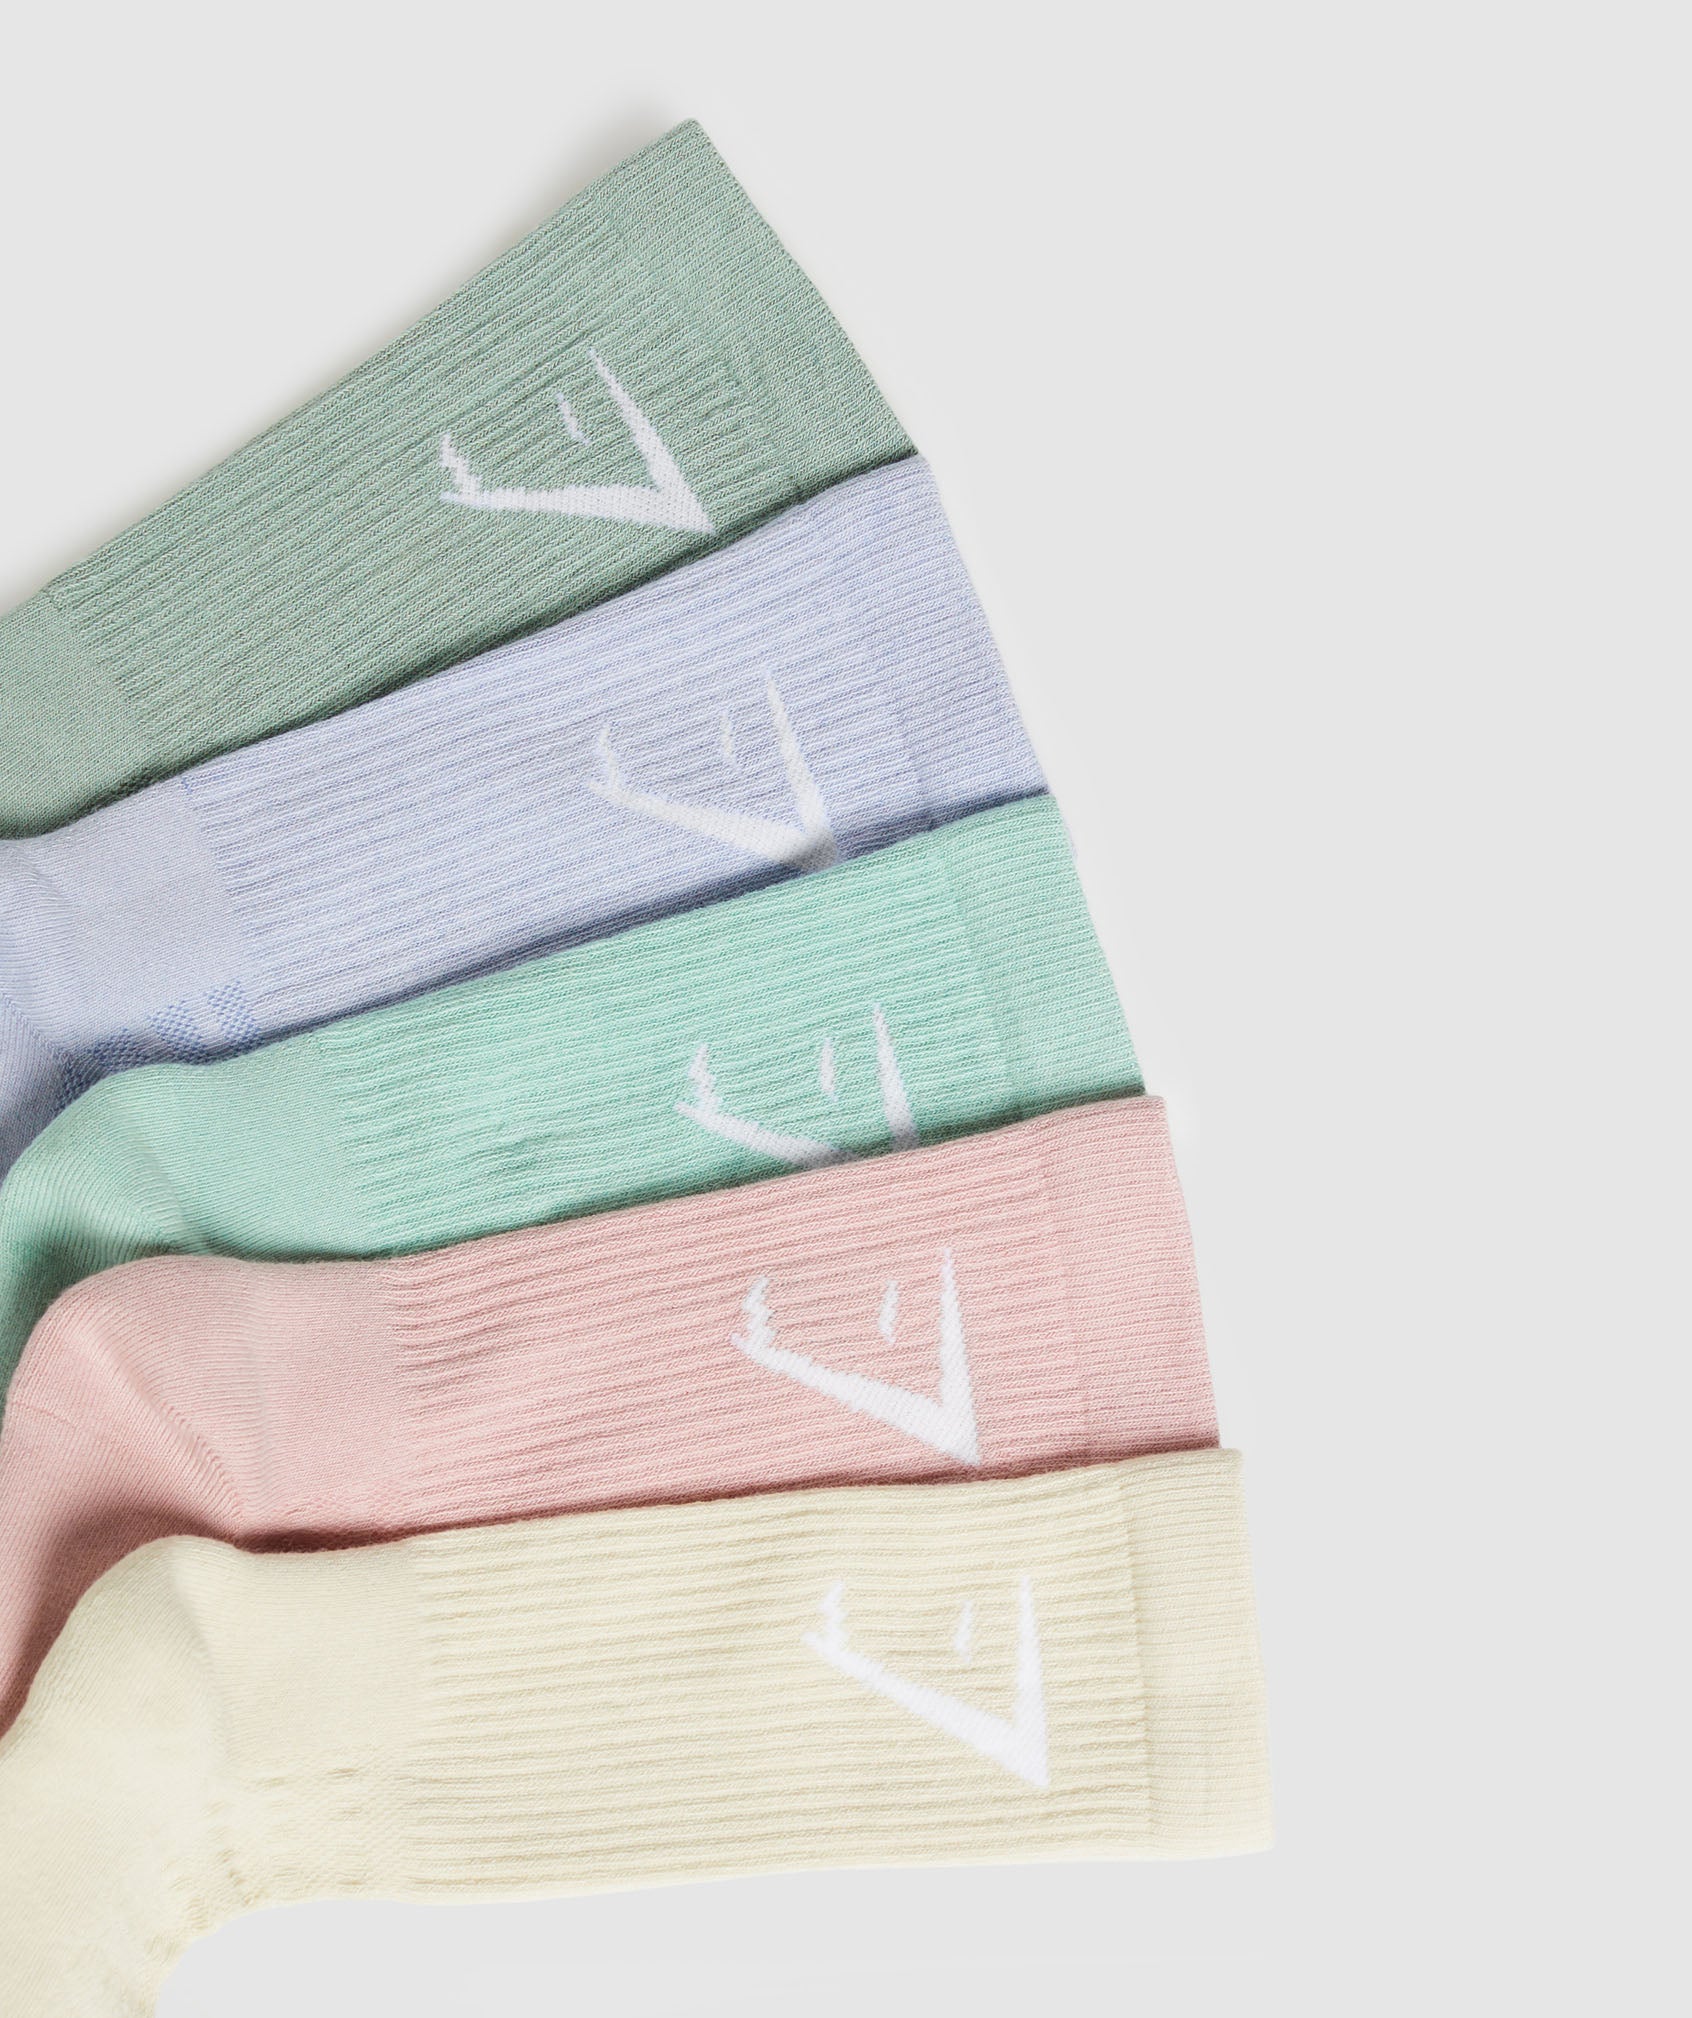 Crew Socks 5pk in White/Pink/Green/Lilac/Green - view 2